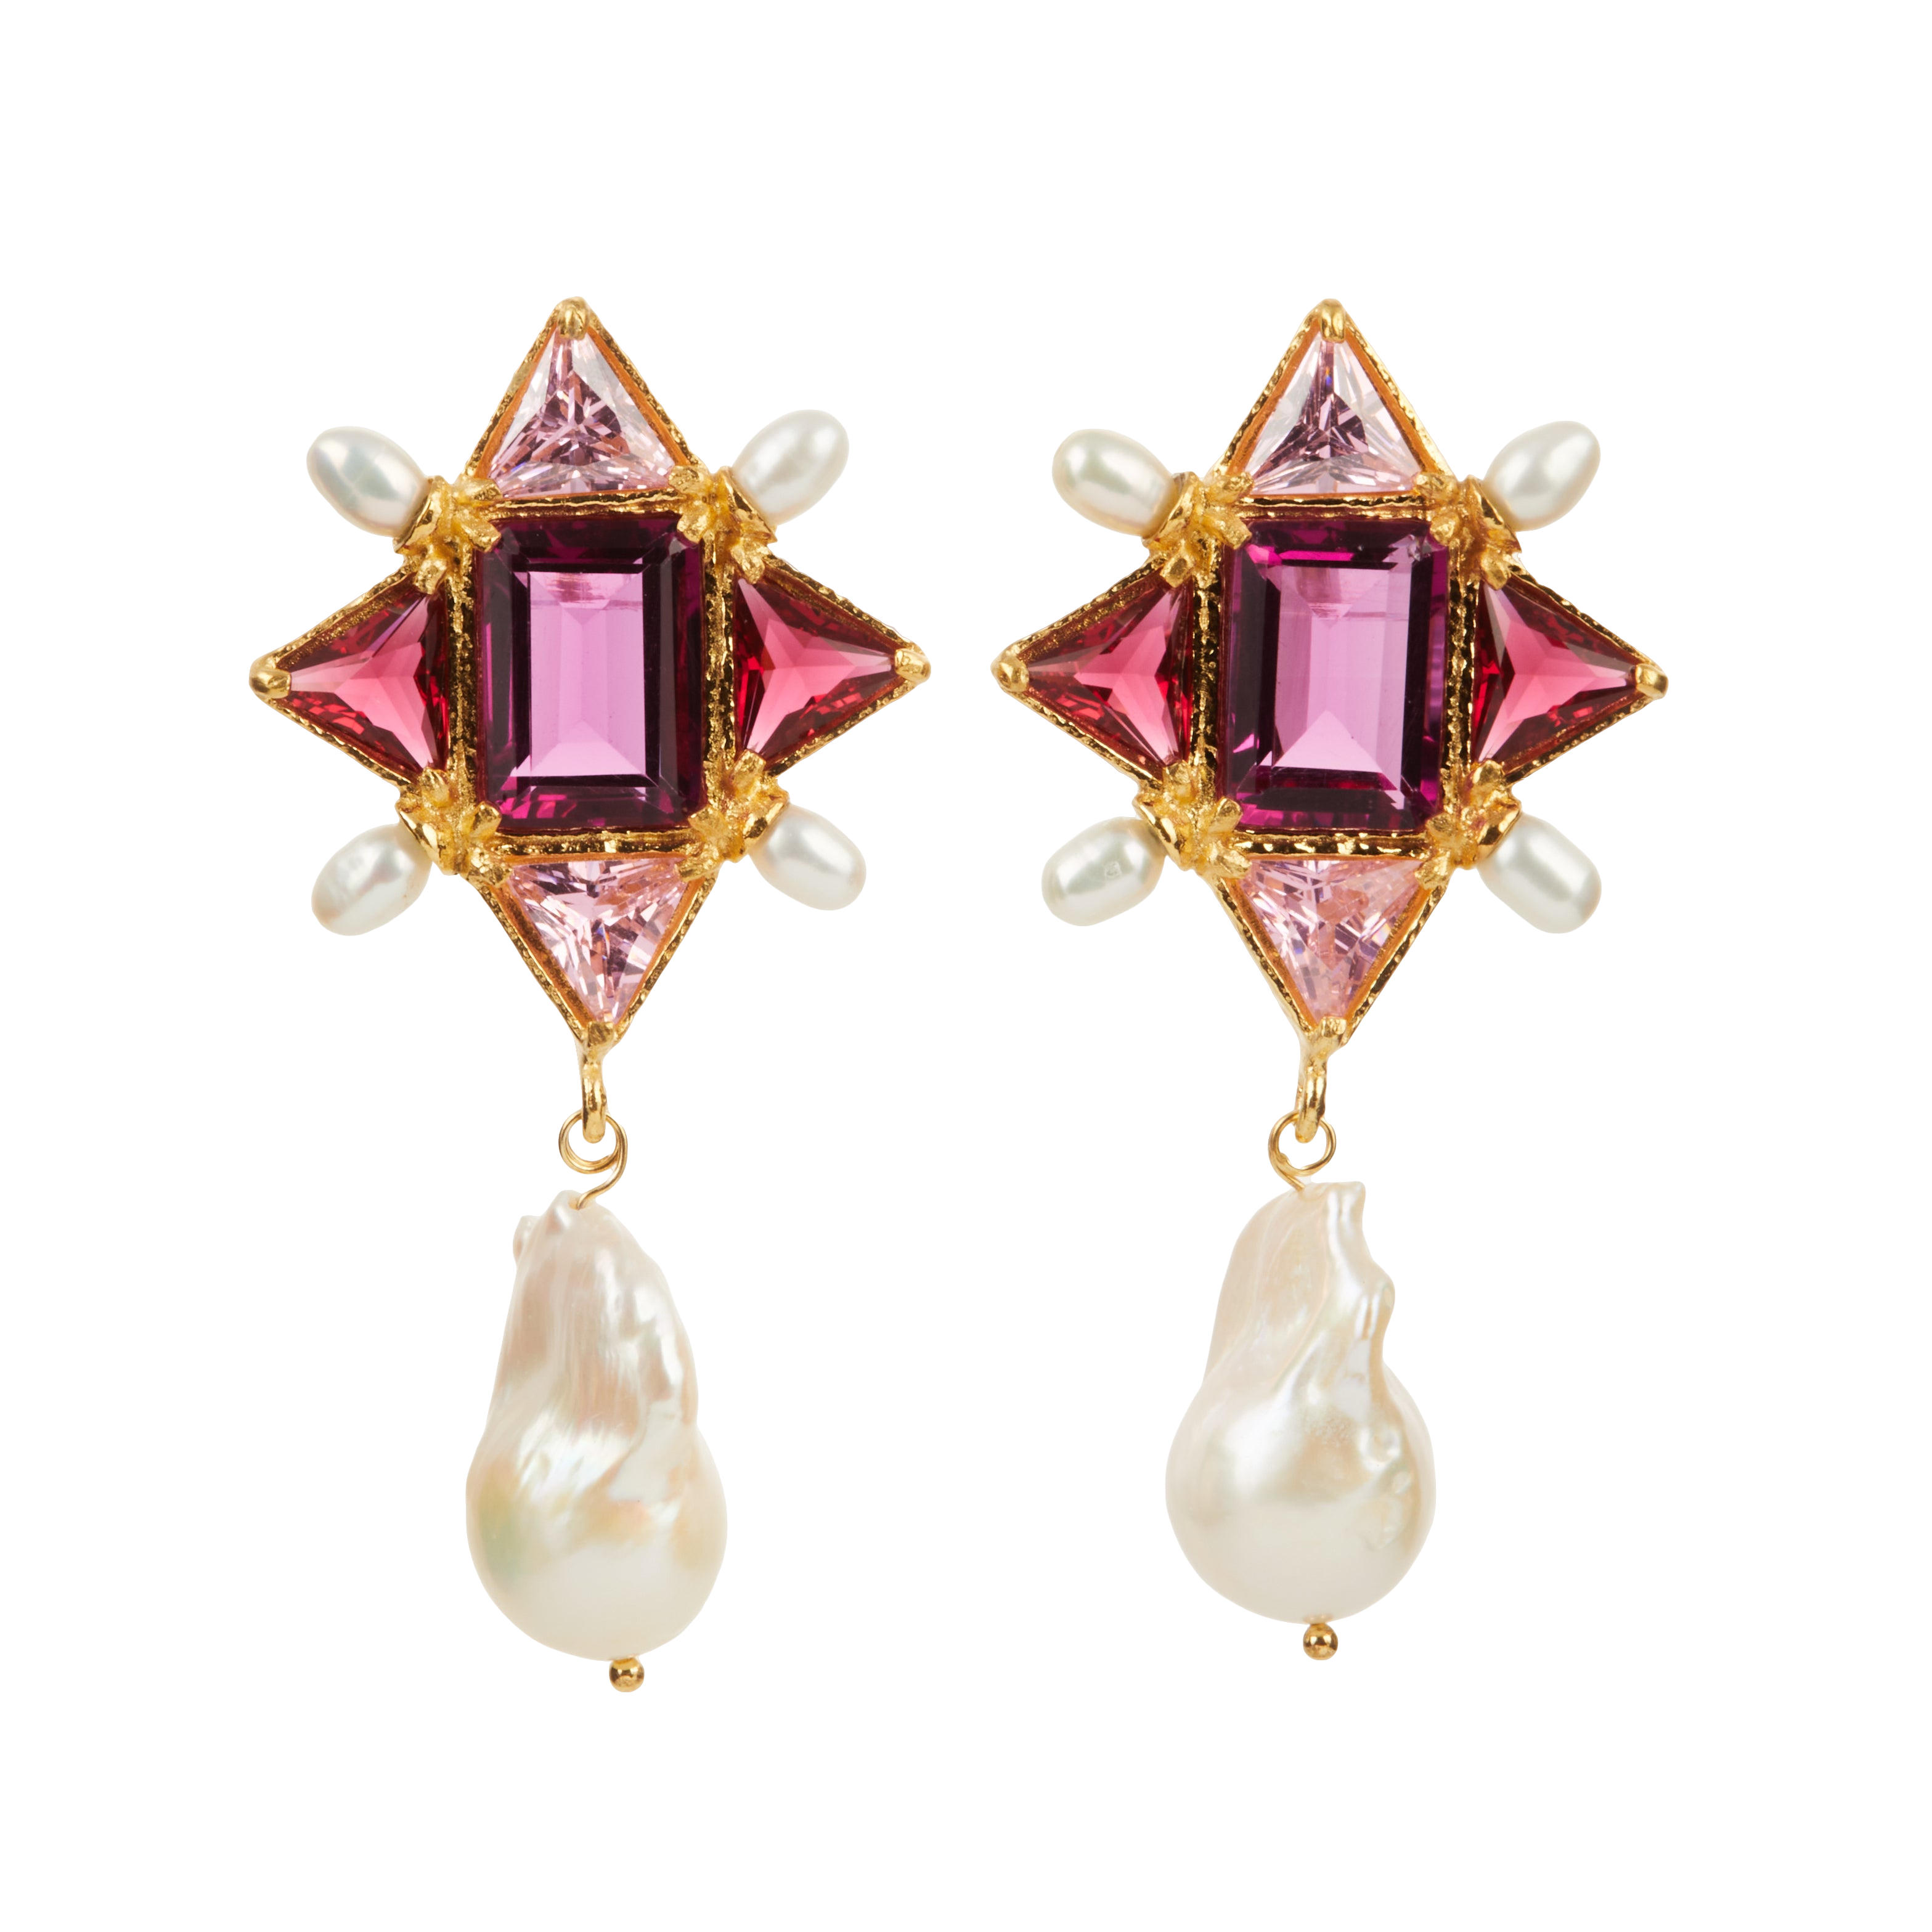 Christie Nicolaides Violetta Earrings Pink In Red